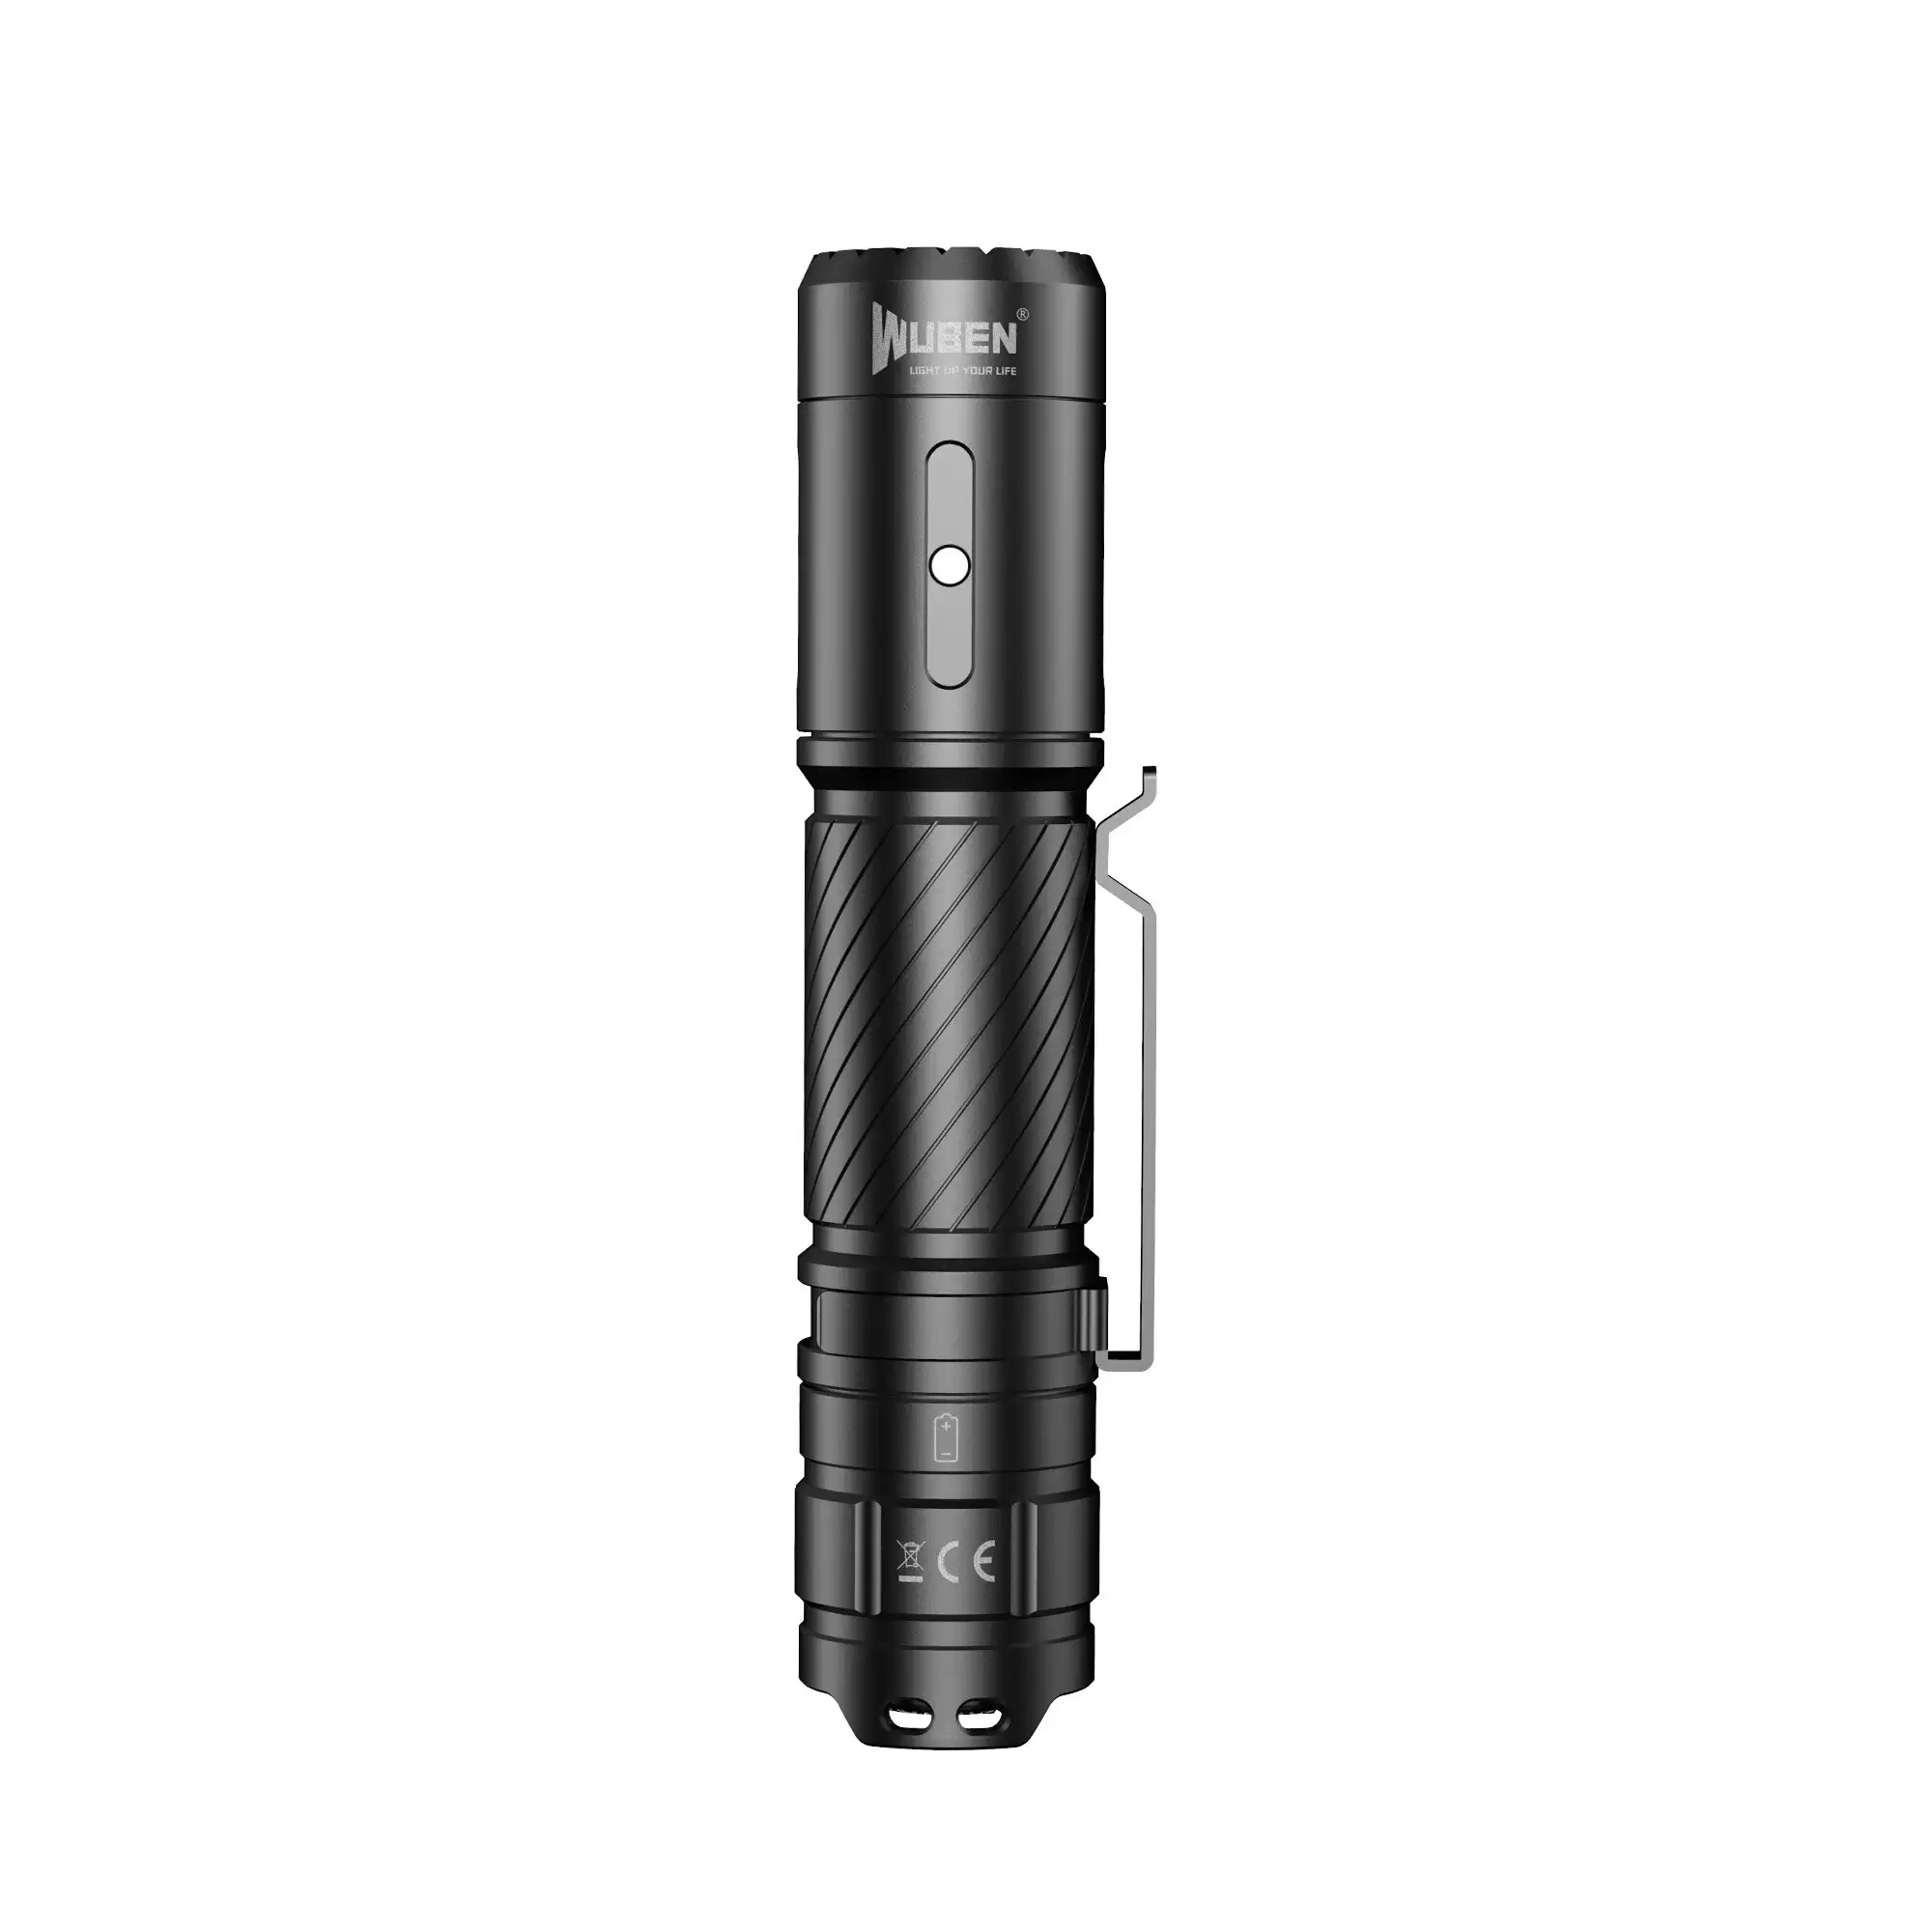 Order In Just $21.96 Wuben C3 Osram P9 1200lm Usb Rechargeable Tactical Flashlight With This Coupon At Banggood